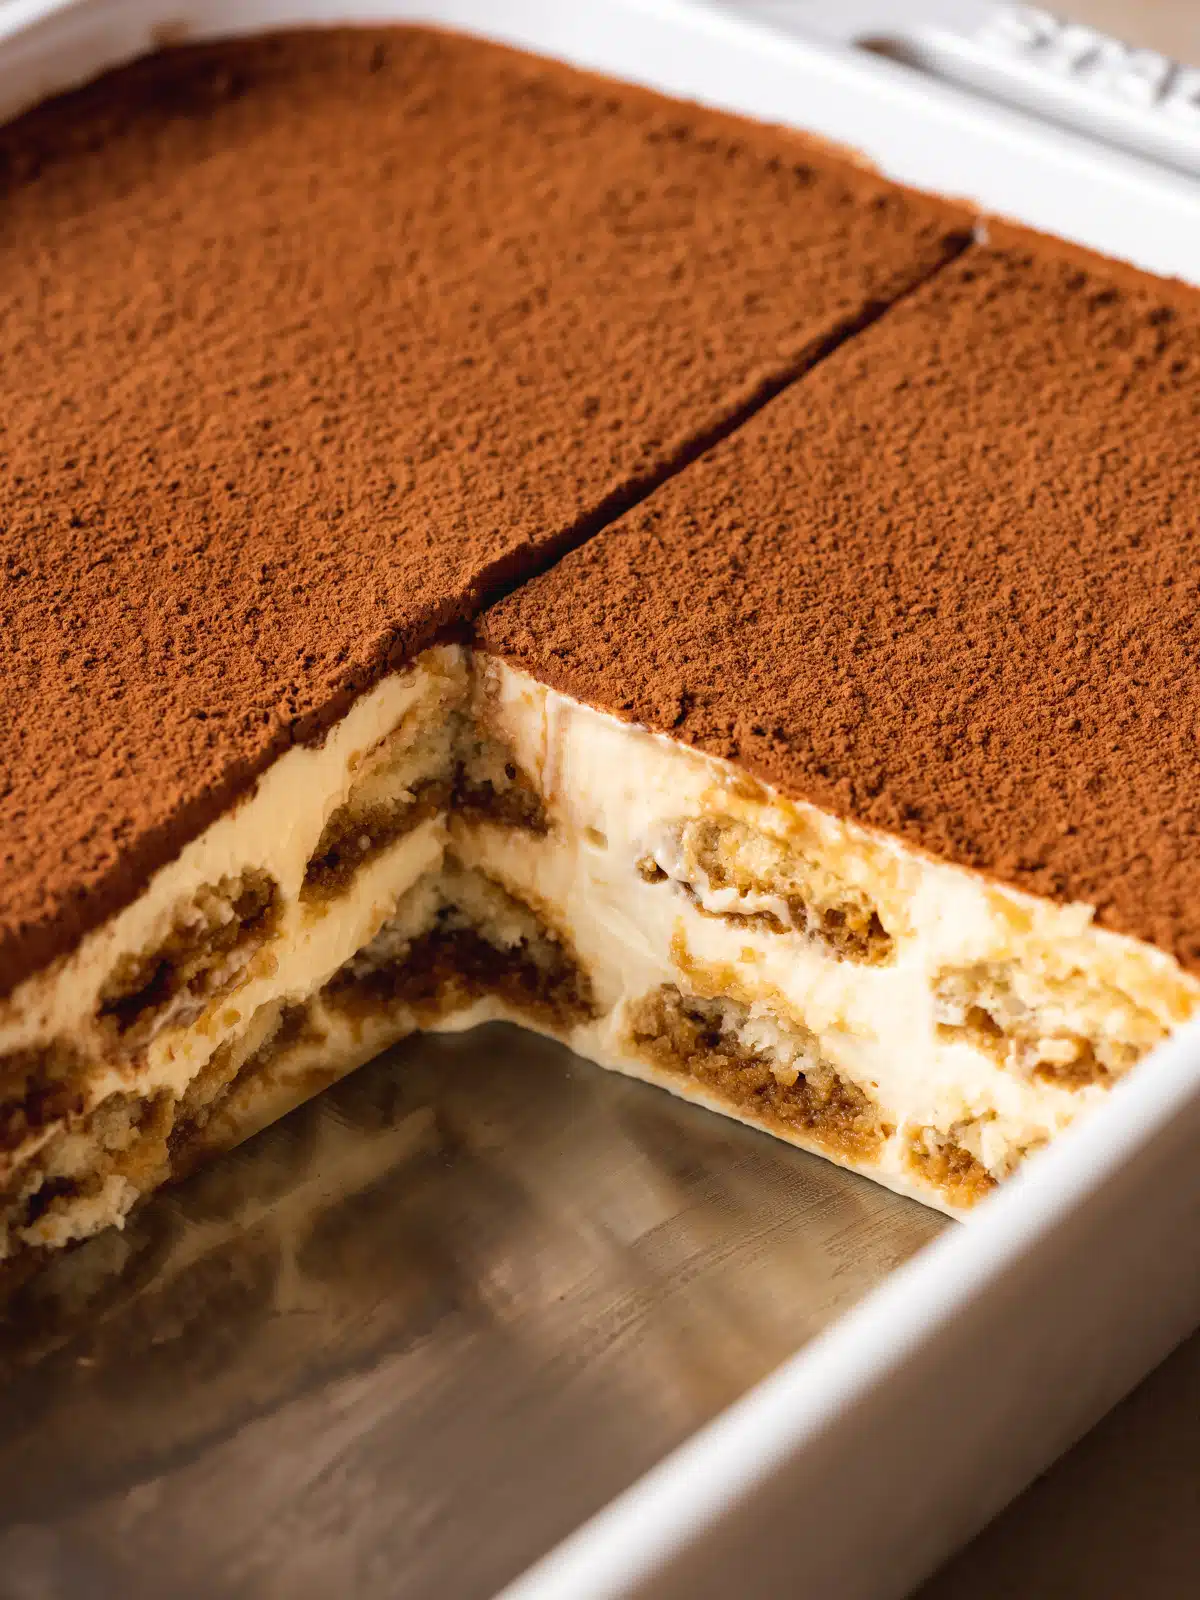 perfectly clean cuts of tiramisu with a slice missing. Shows a cross-section of espresso rum soaked ladyfingers between layers of mascarpone cream.